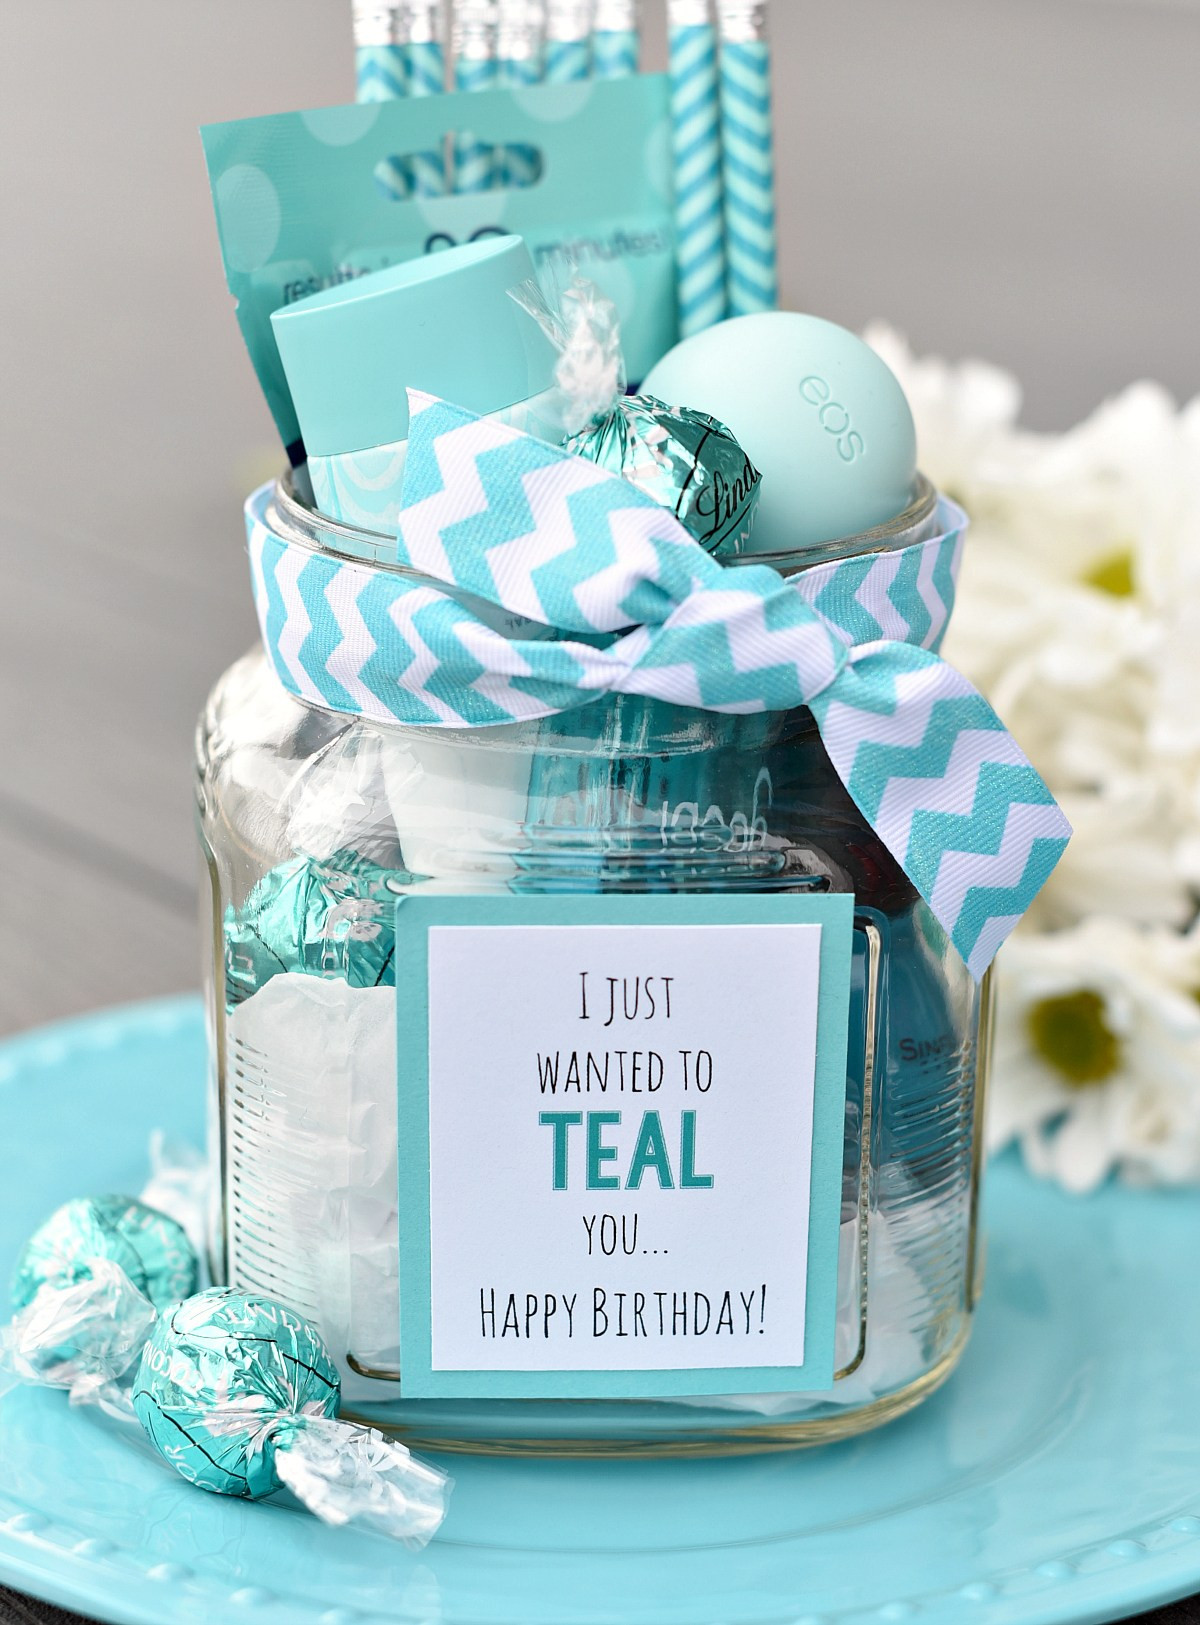 Gift Basket Ideas For Friends
 Teal Birthday Gift Idea for Friends – Fun Squared